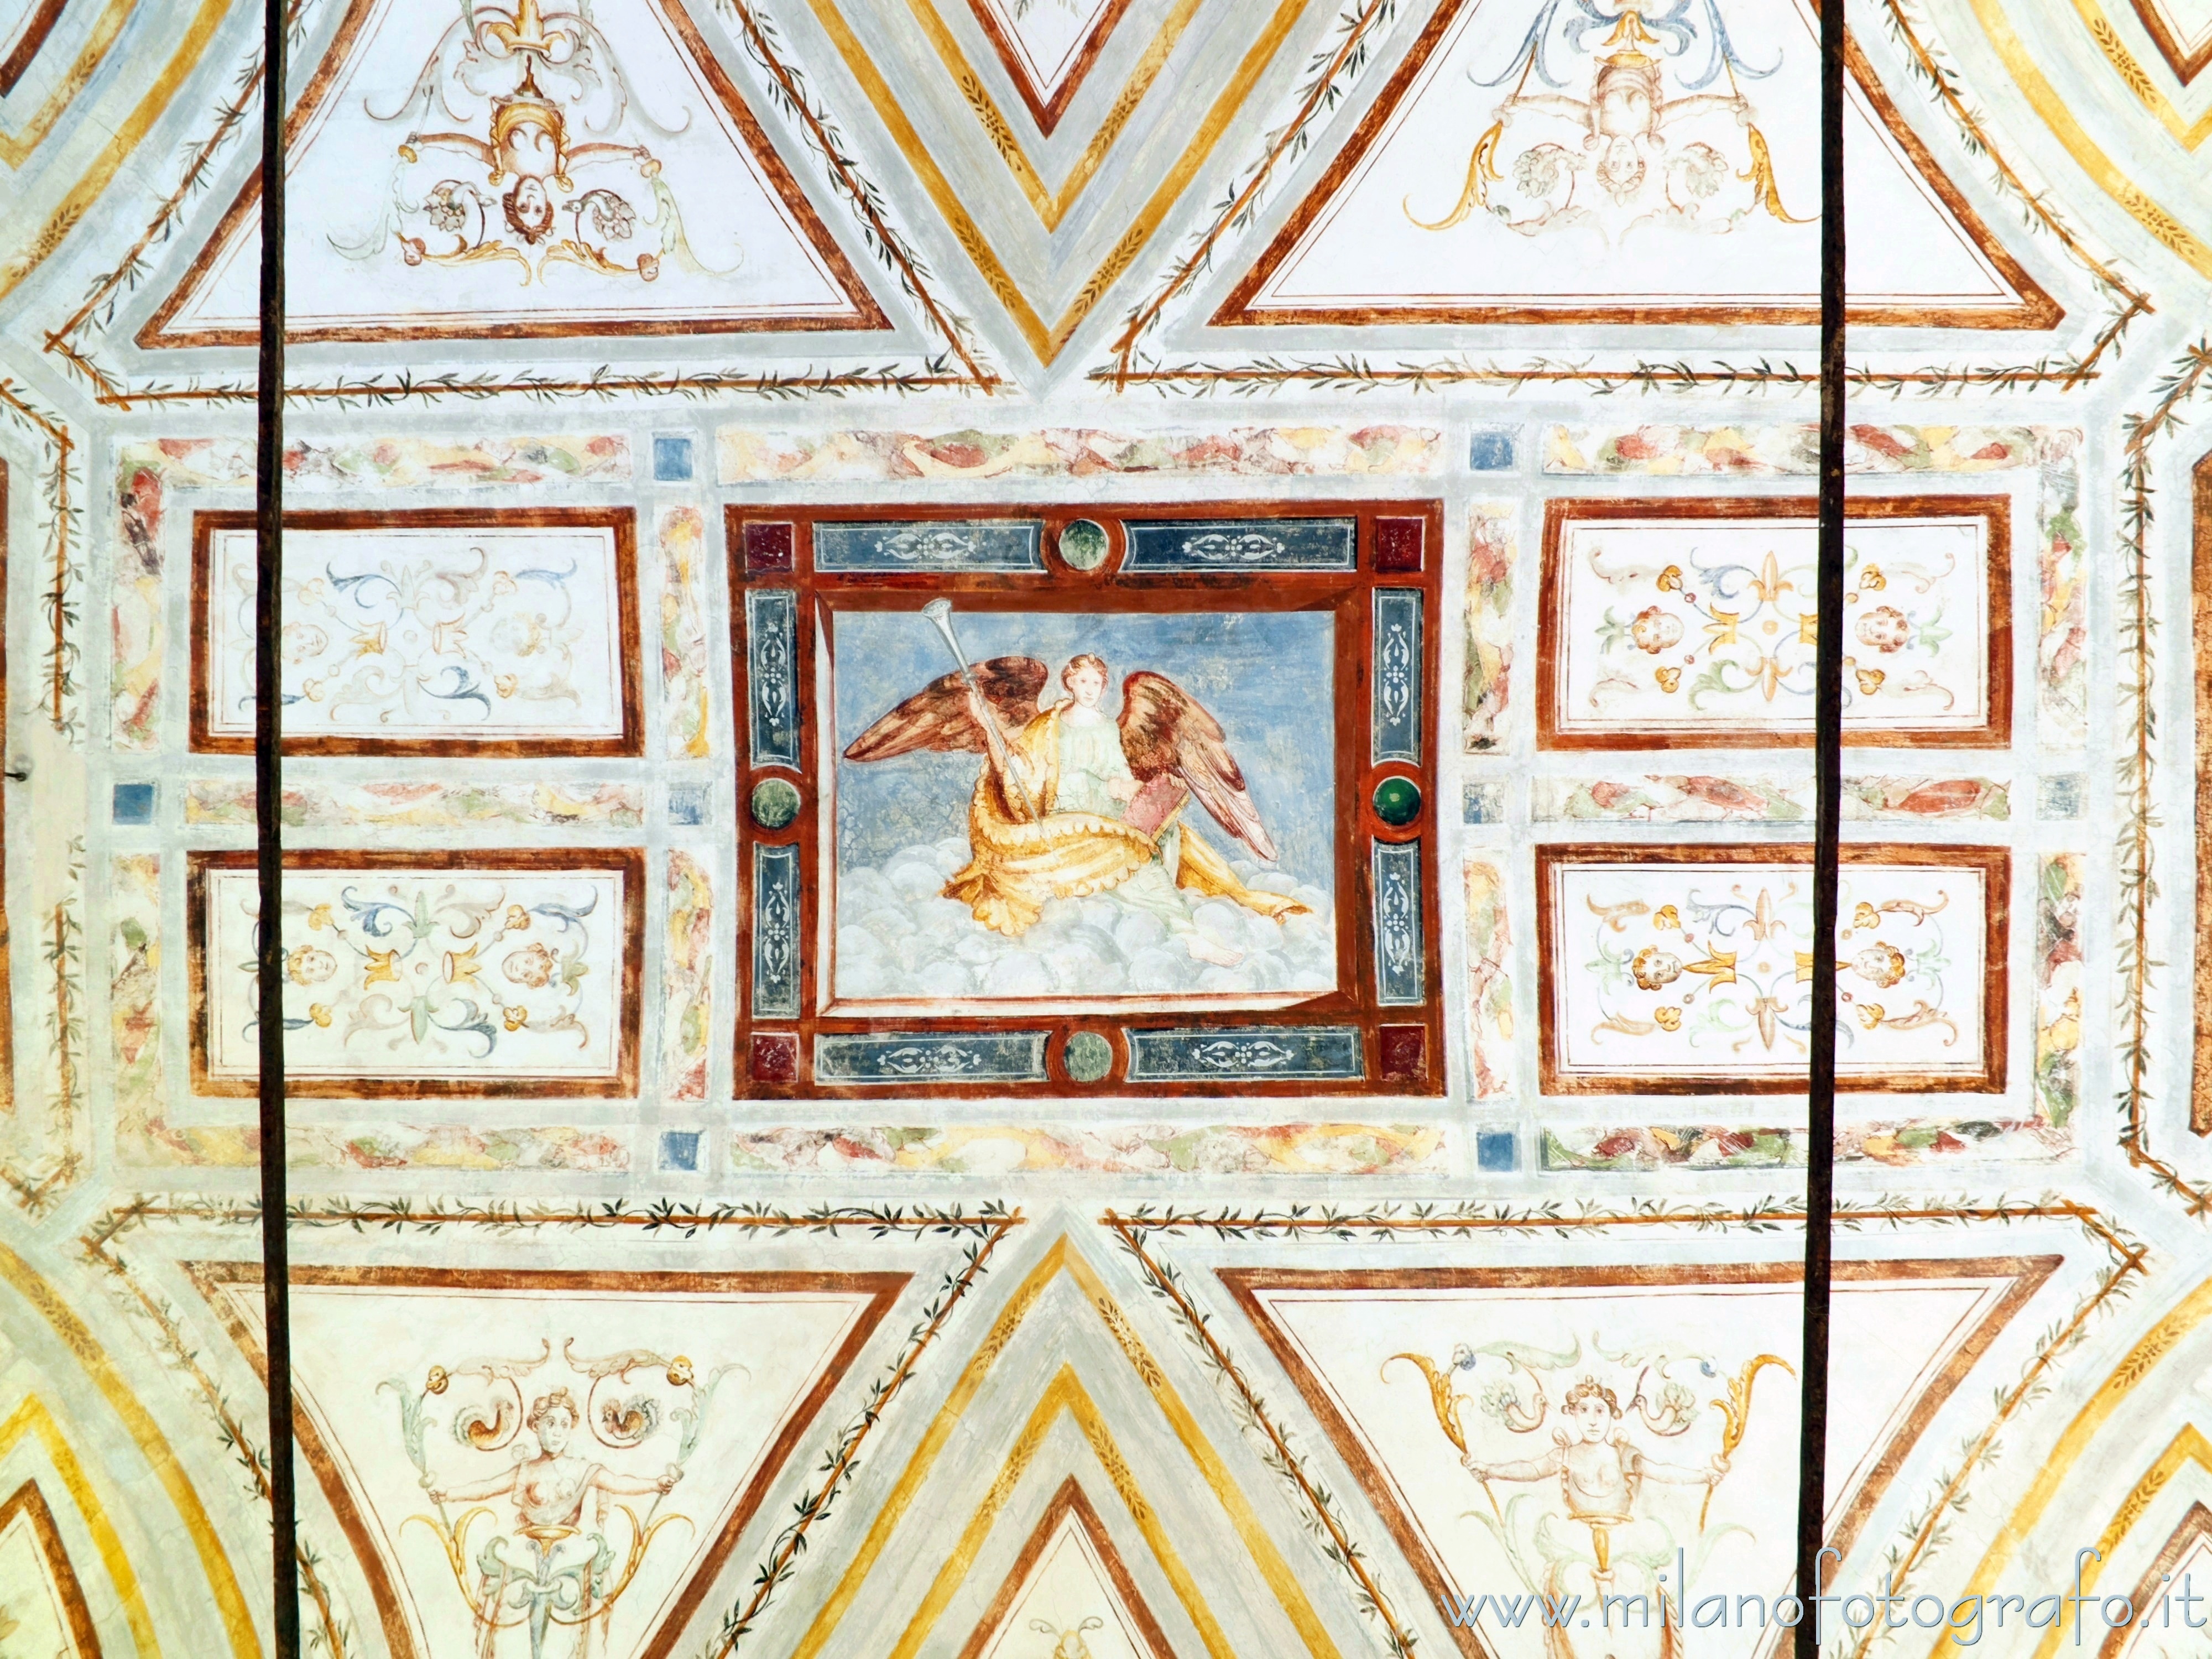 Bellusco (Monza e Brianza, Italy): Renaissance frescoes on the ceiling of the Hall of Fame in the Castle of Bellusco - Bellusco (Monza e Brianza, Italy)